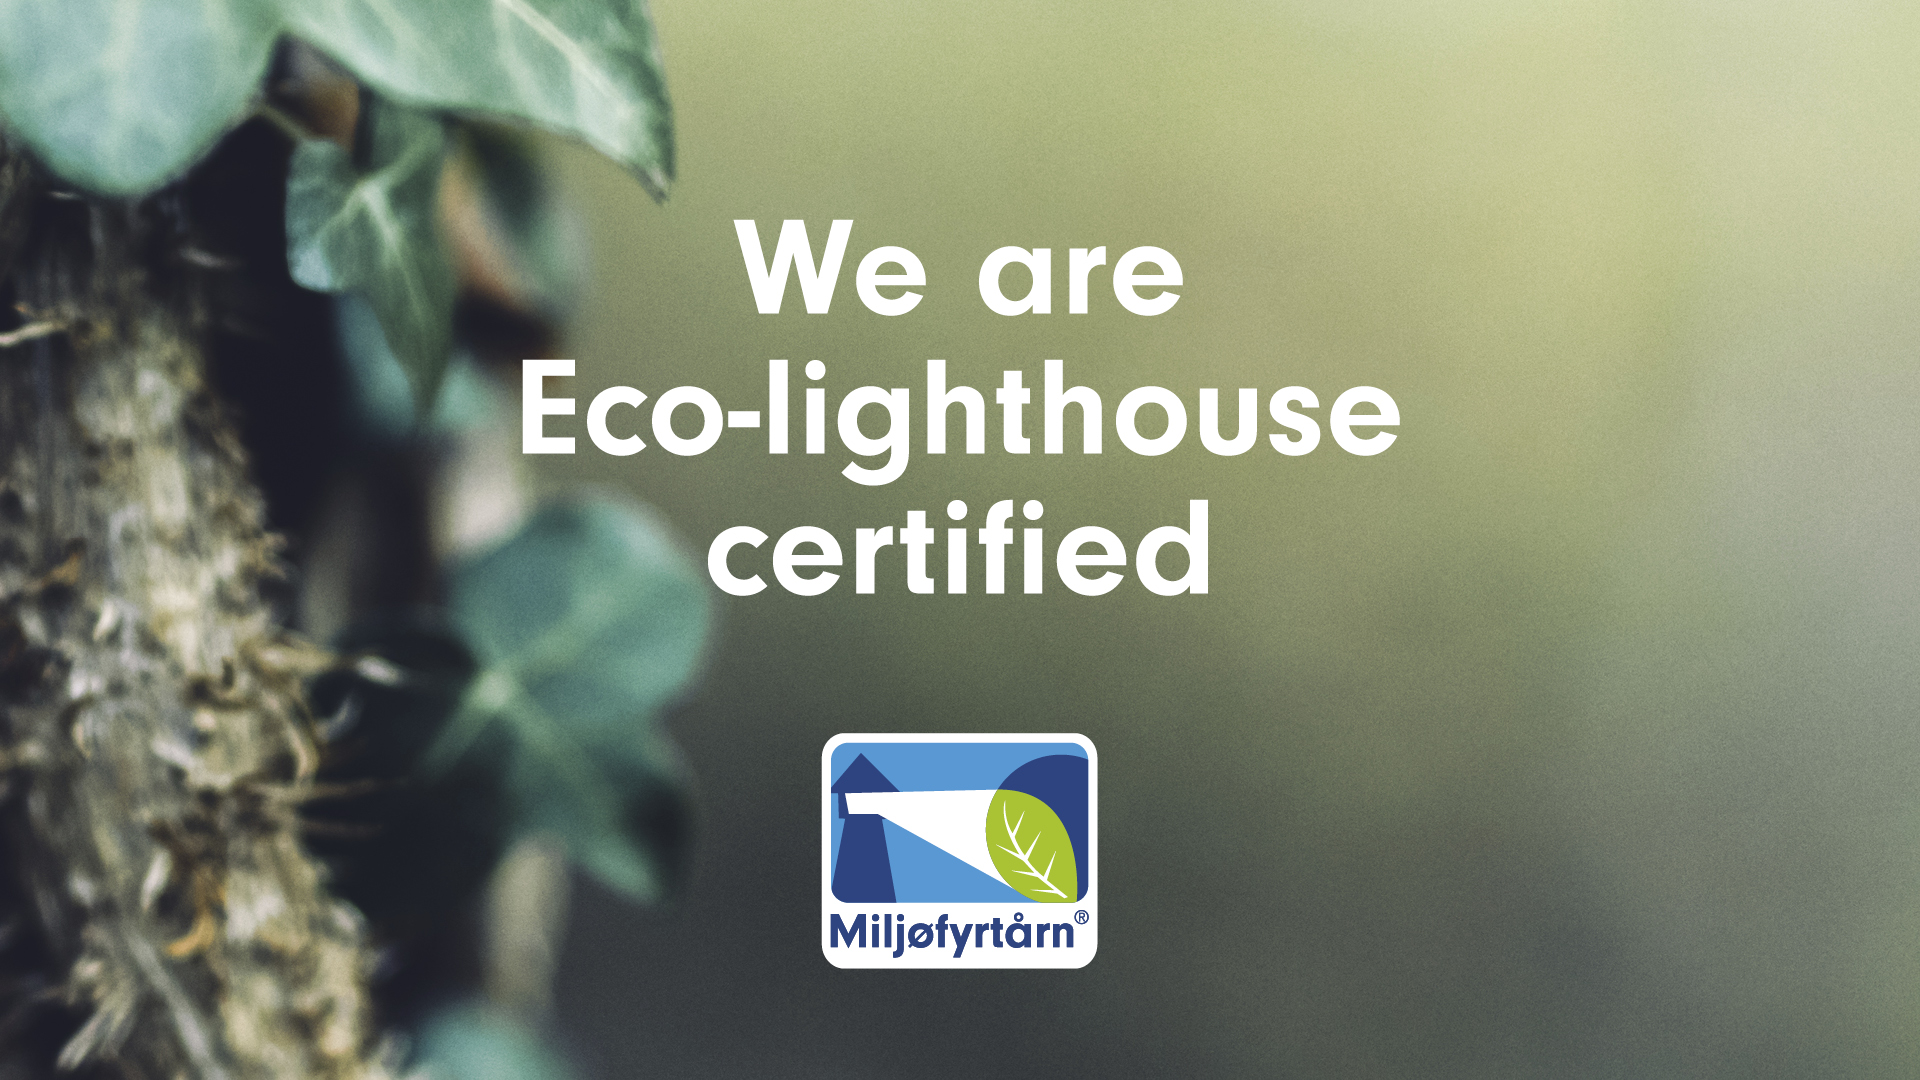 CURRENT is now Eco-Lighthouse certified